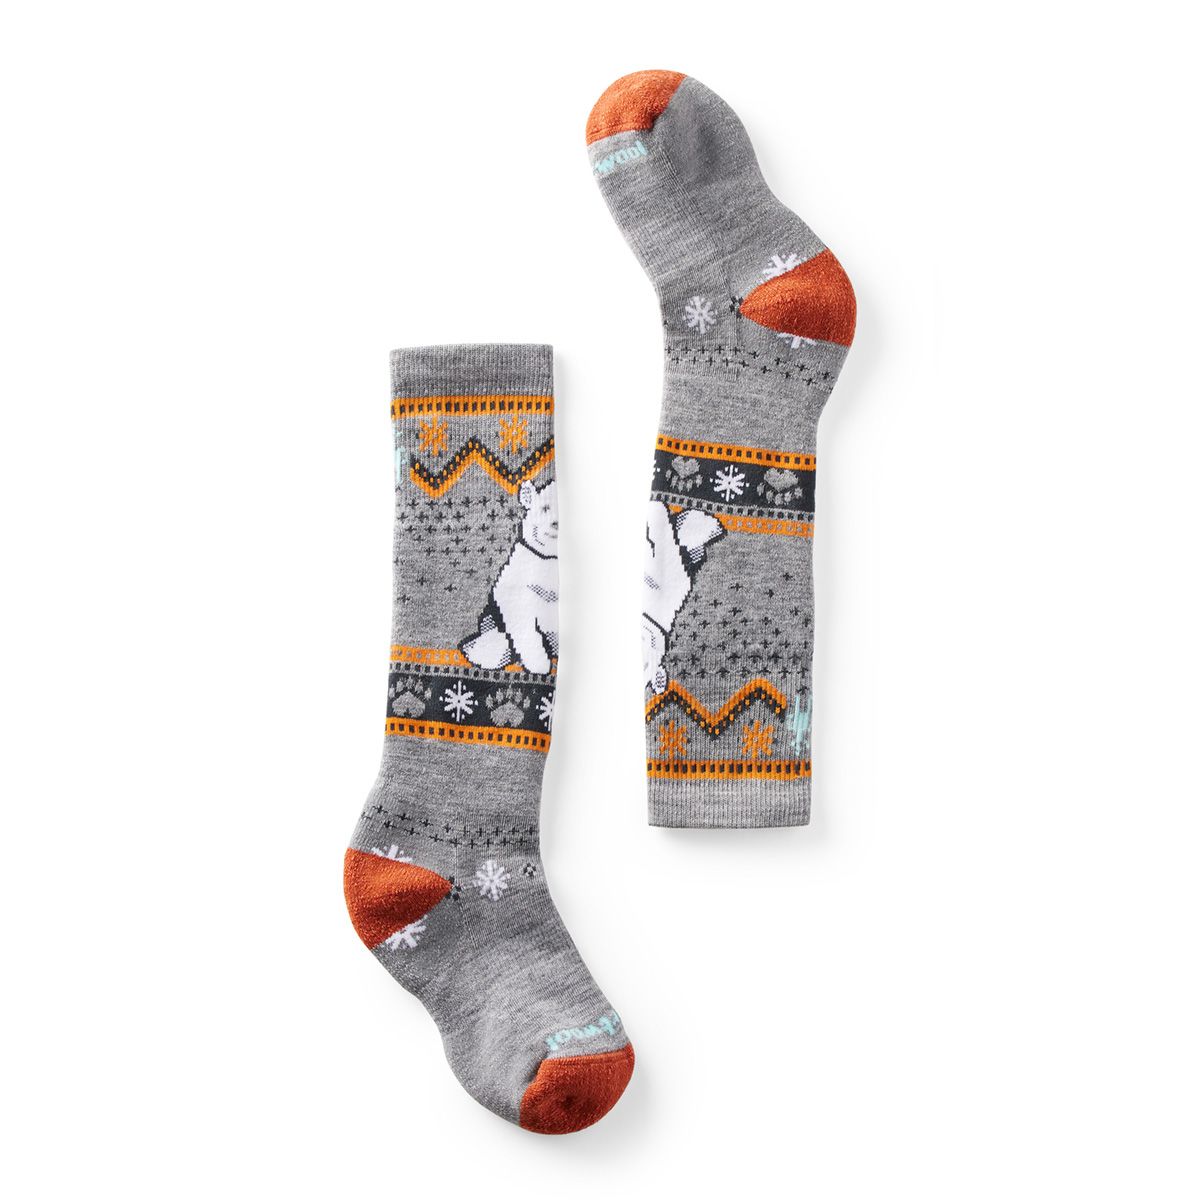 Polar Feet Canada  Warm Cozy Socks and Slippers for the whole family